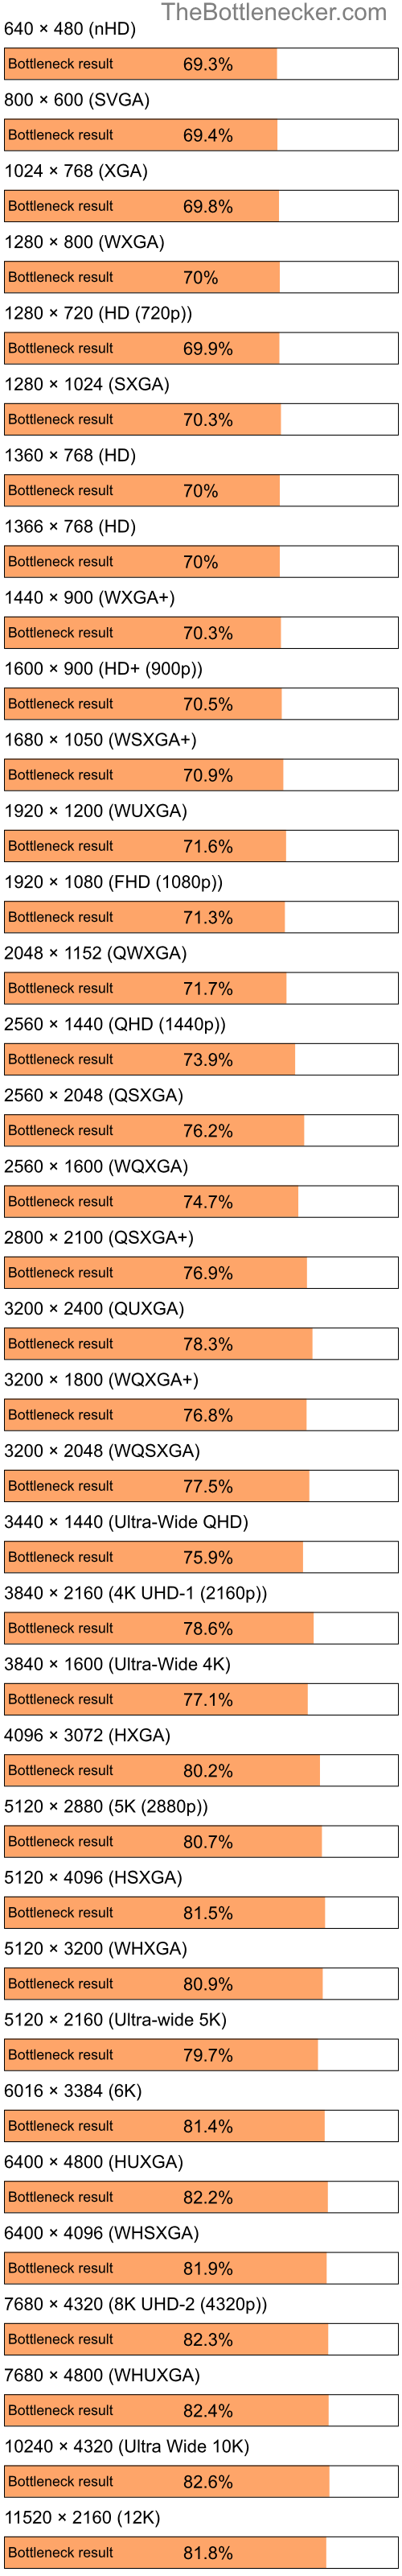 Bottleneck results by resolution for Intel Pentium 4 and AMD Radeon X1050 in Processor Intense Tasks